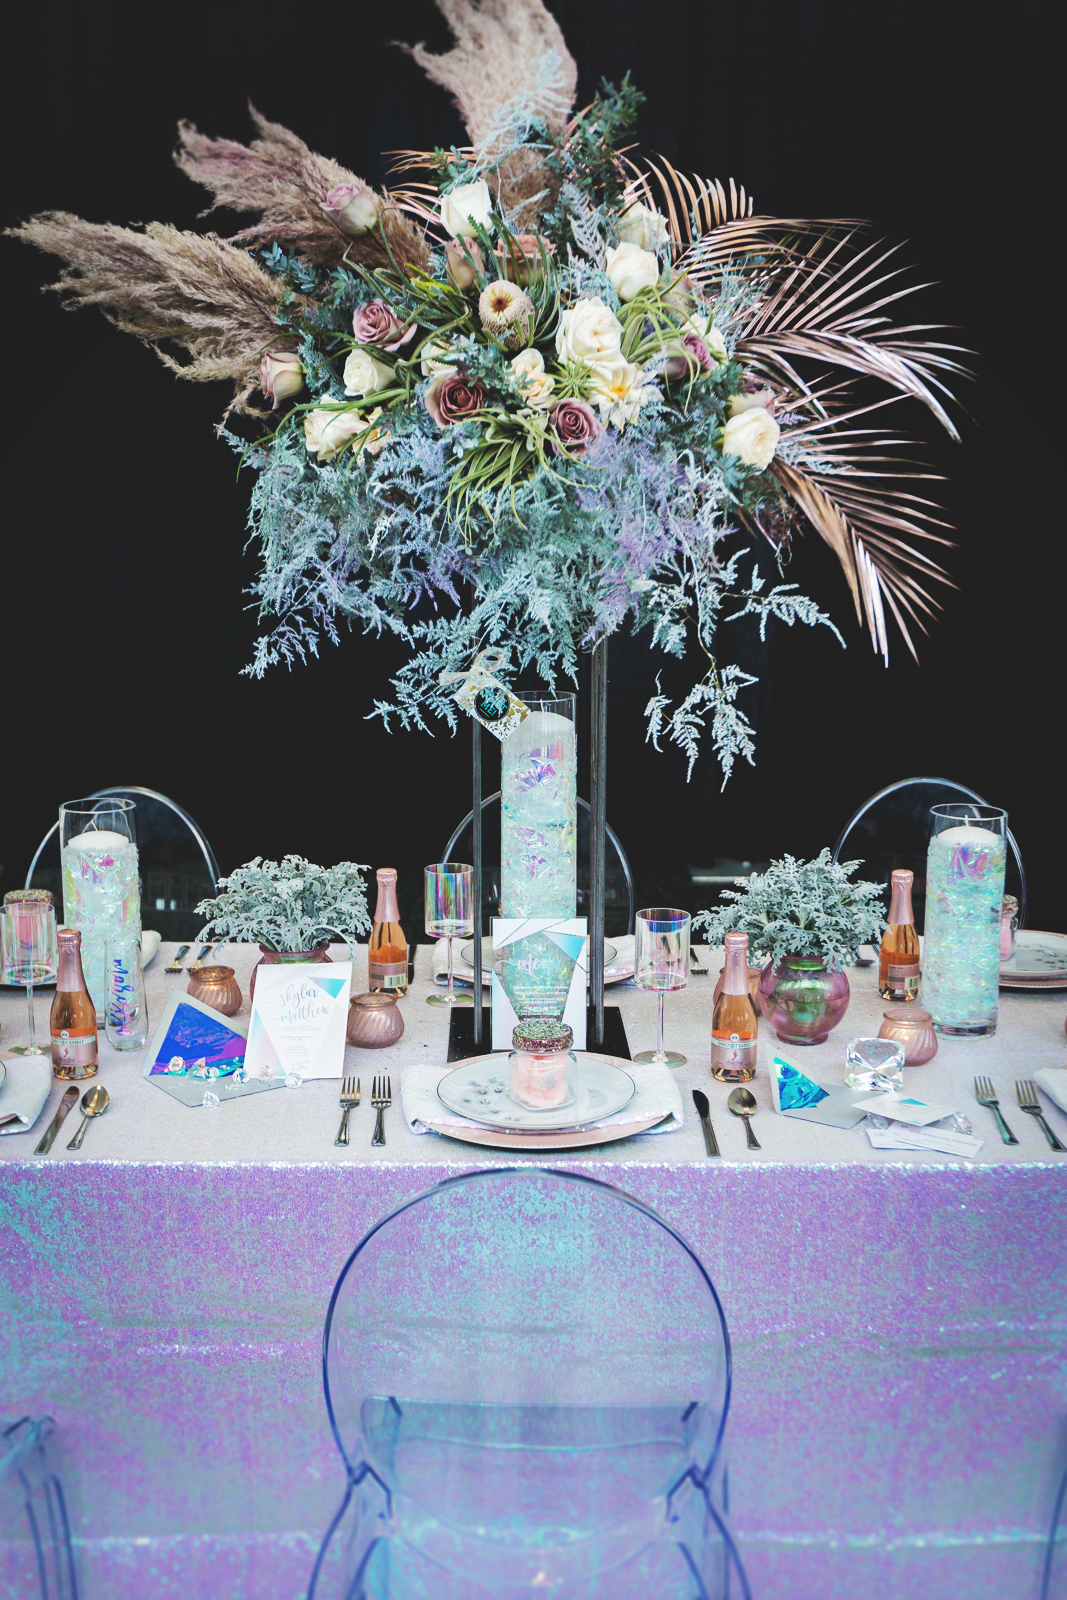 styled table scape